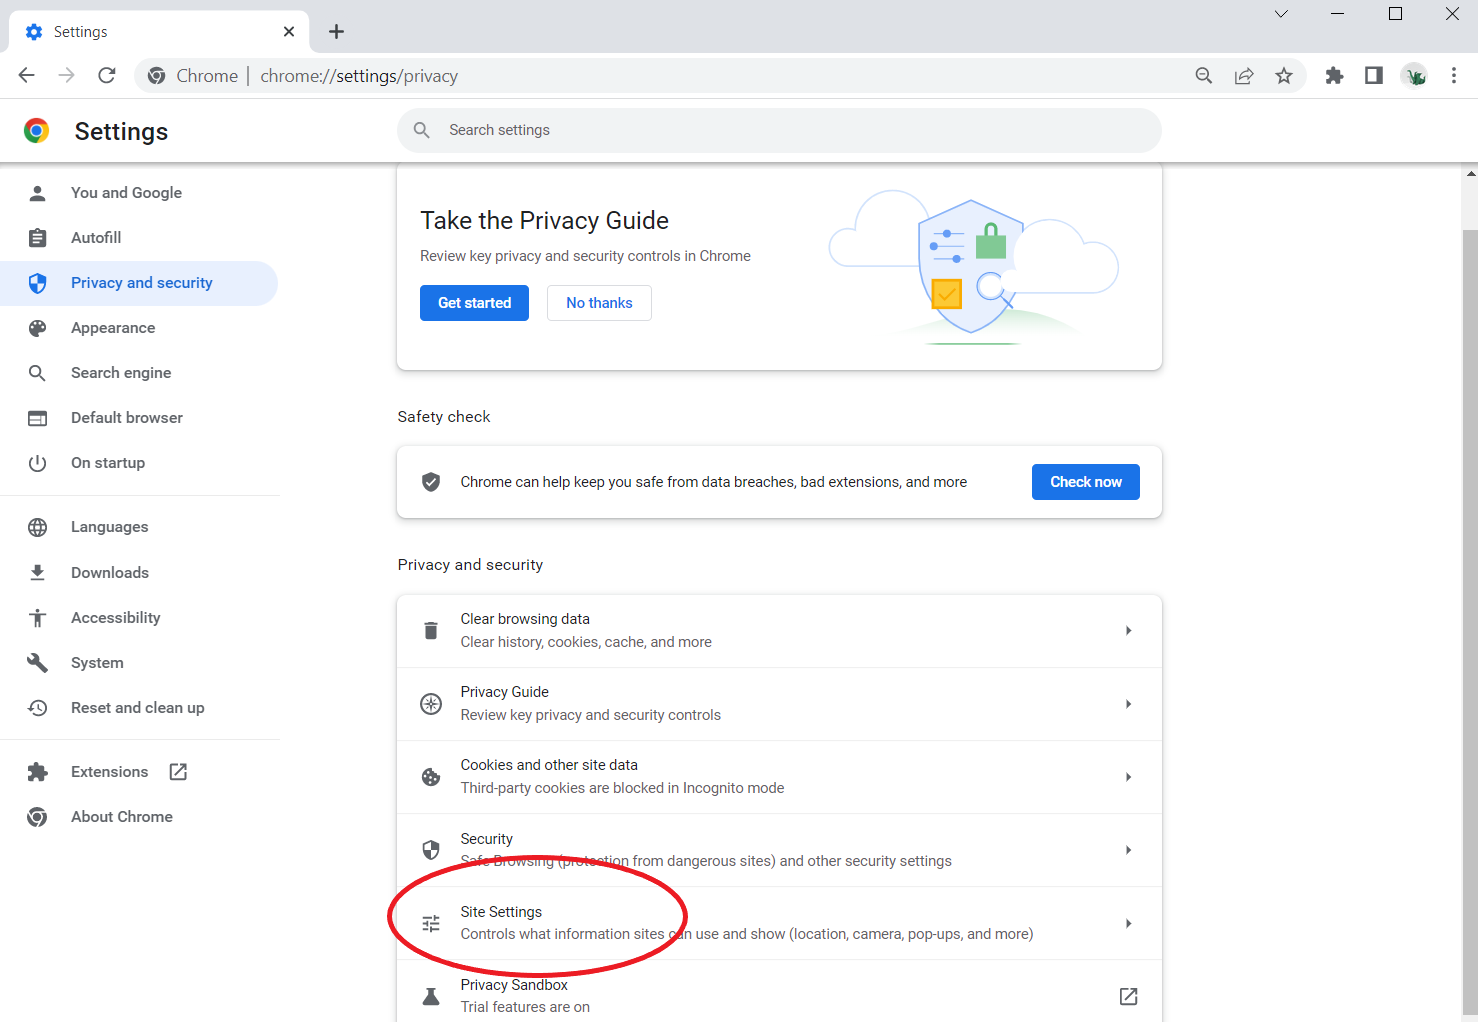 Screenshot of the Google Chrome Settings/Privacy and security screen with the Site Settings option circled in red.